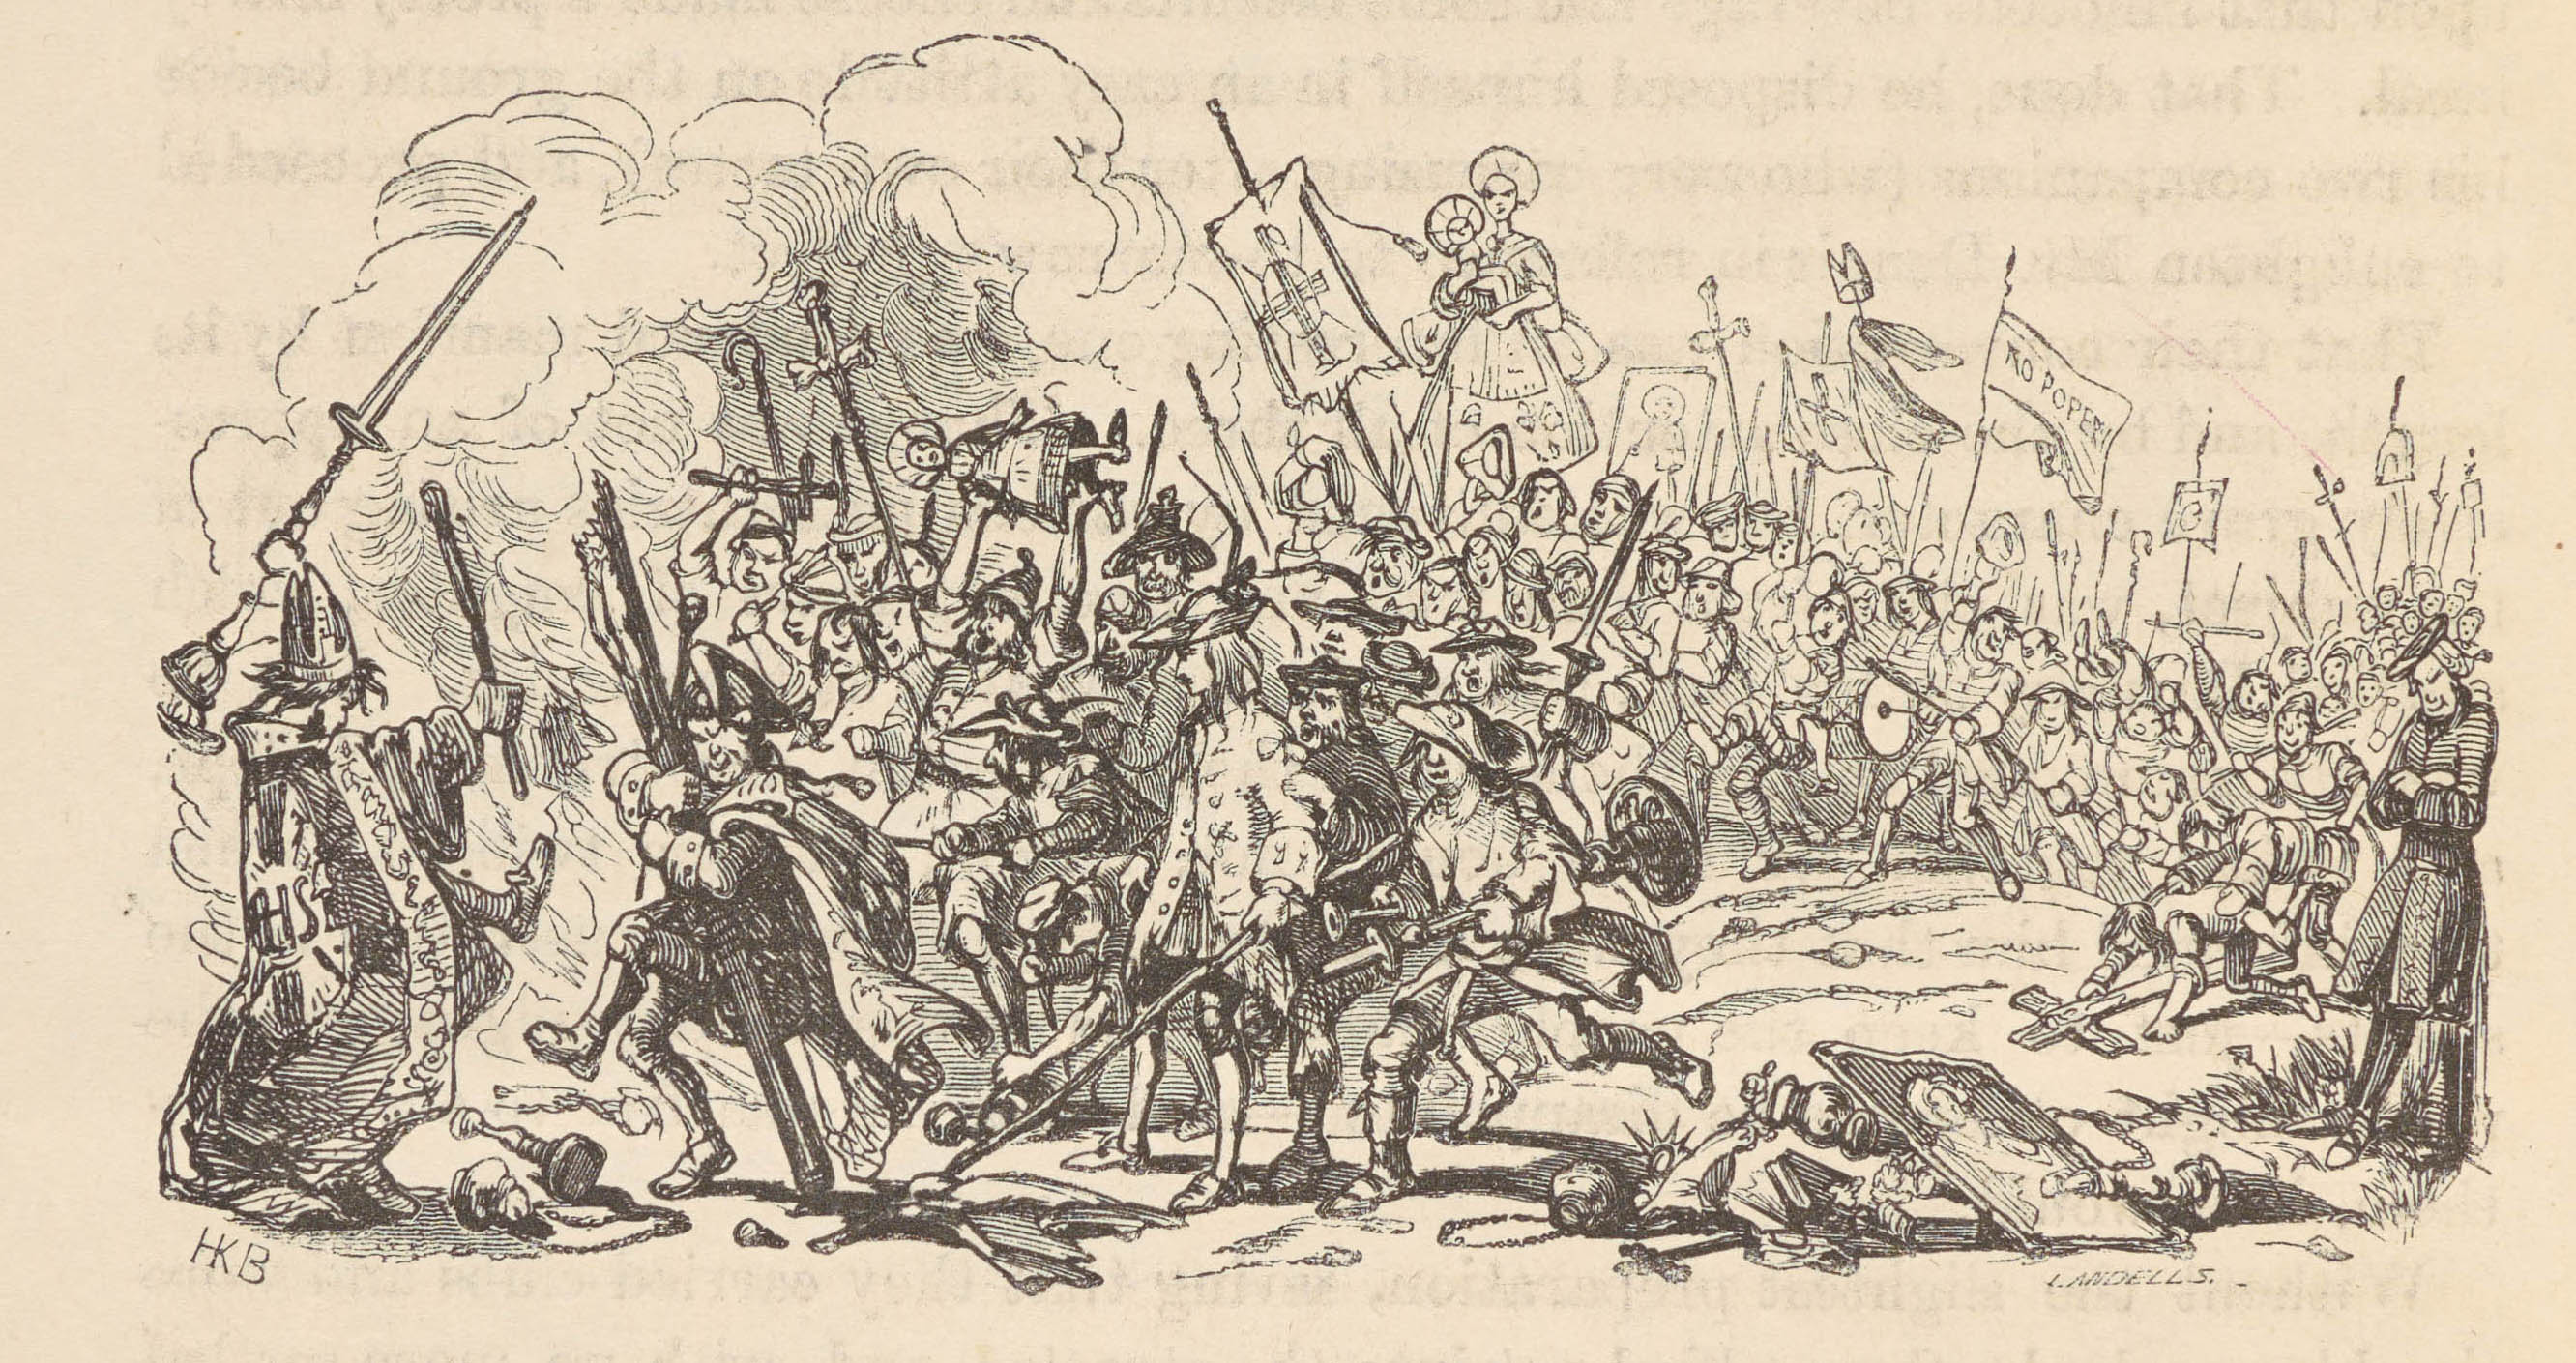 Image of a riot in Barnaby Rudge